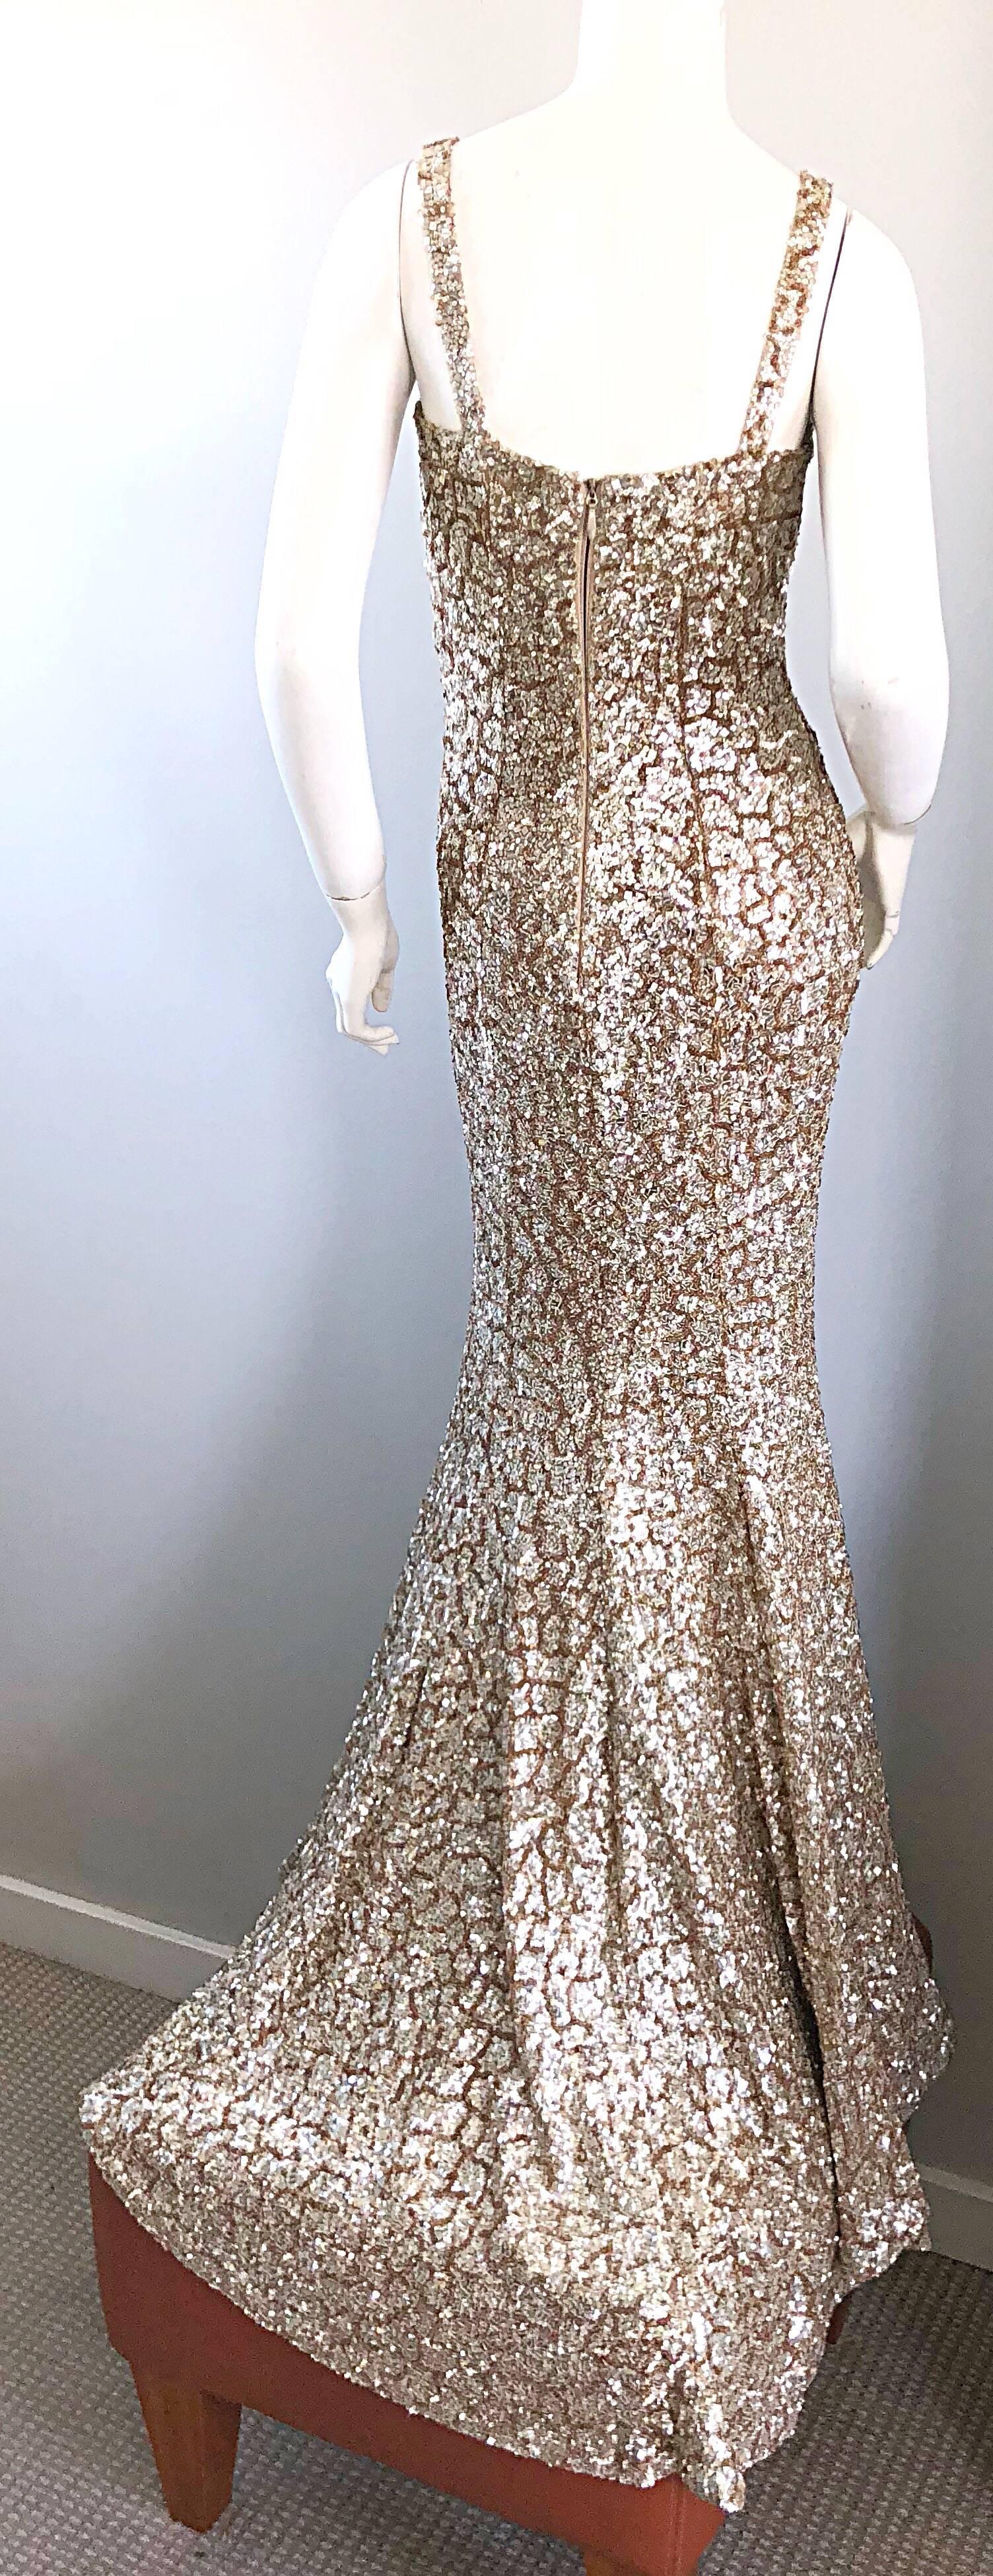 Monique Lhuillier Gorgeous Resort 2012 Gold Rose Gold Full Sequin Trained Gown  7